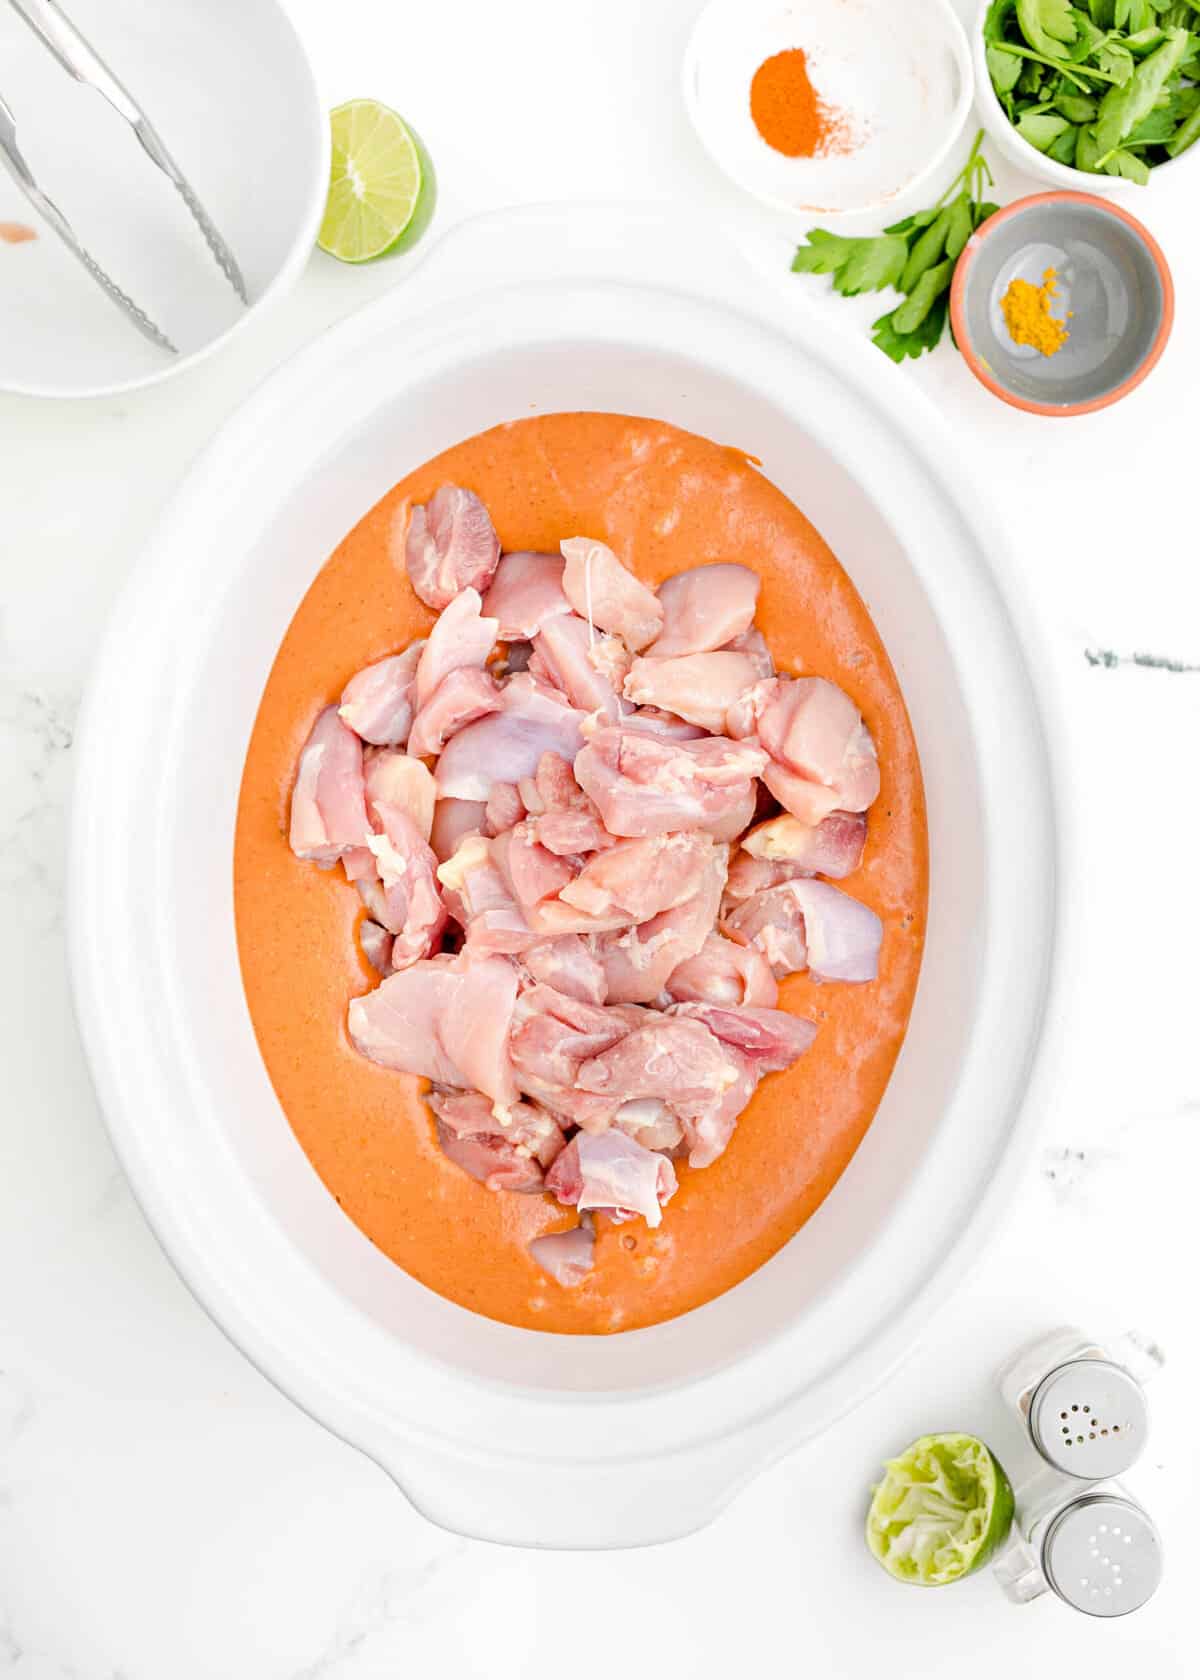 uncooked chicken is placed in the center of a slow cooker.